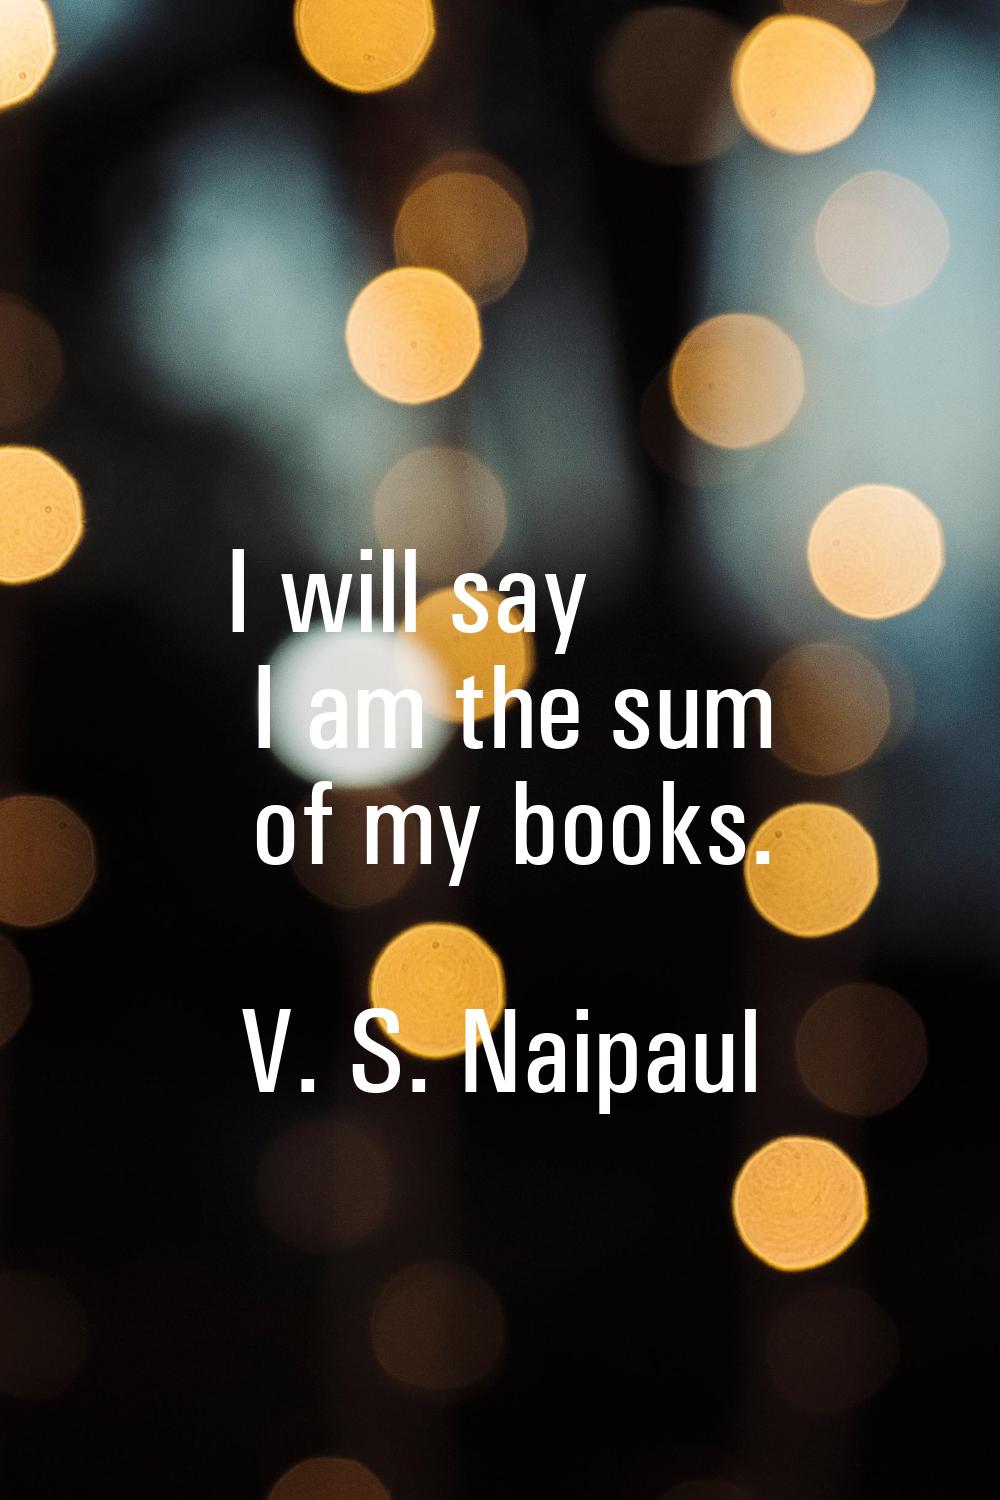 I will say I am the sum of my books.